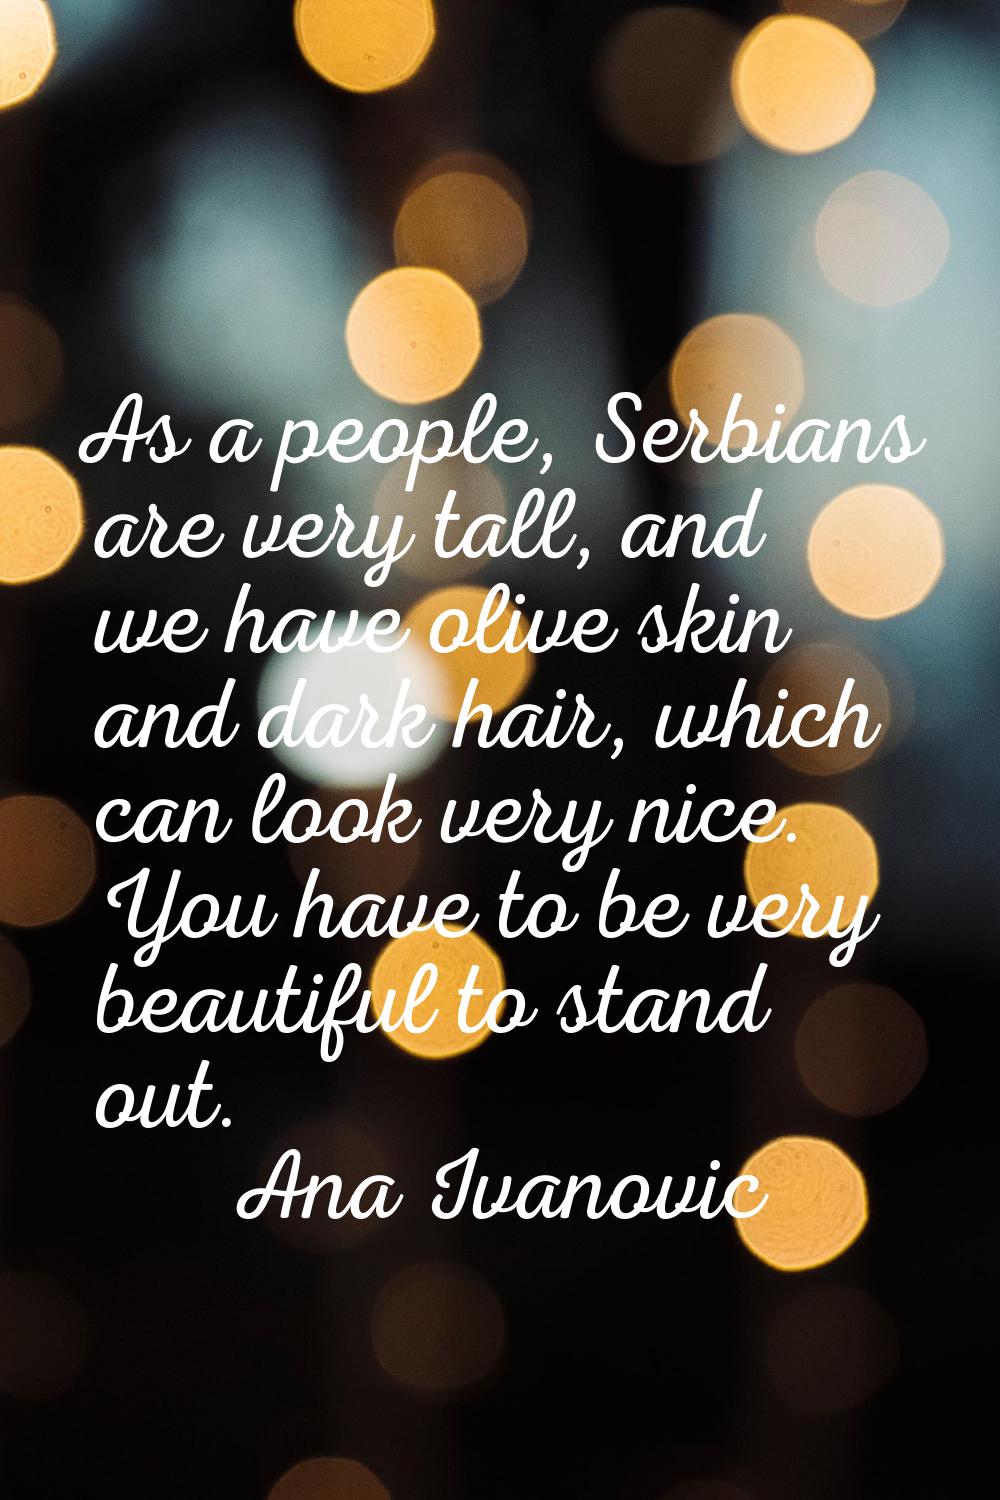 As a people, Serbians are very tall, and we have olive skin and dark hair, which can look very nice